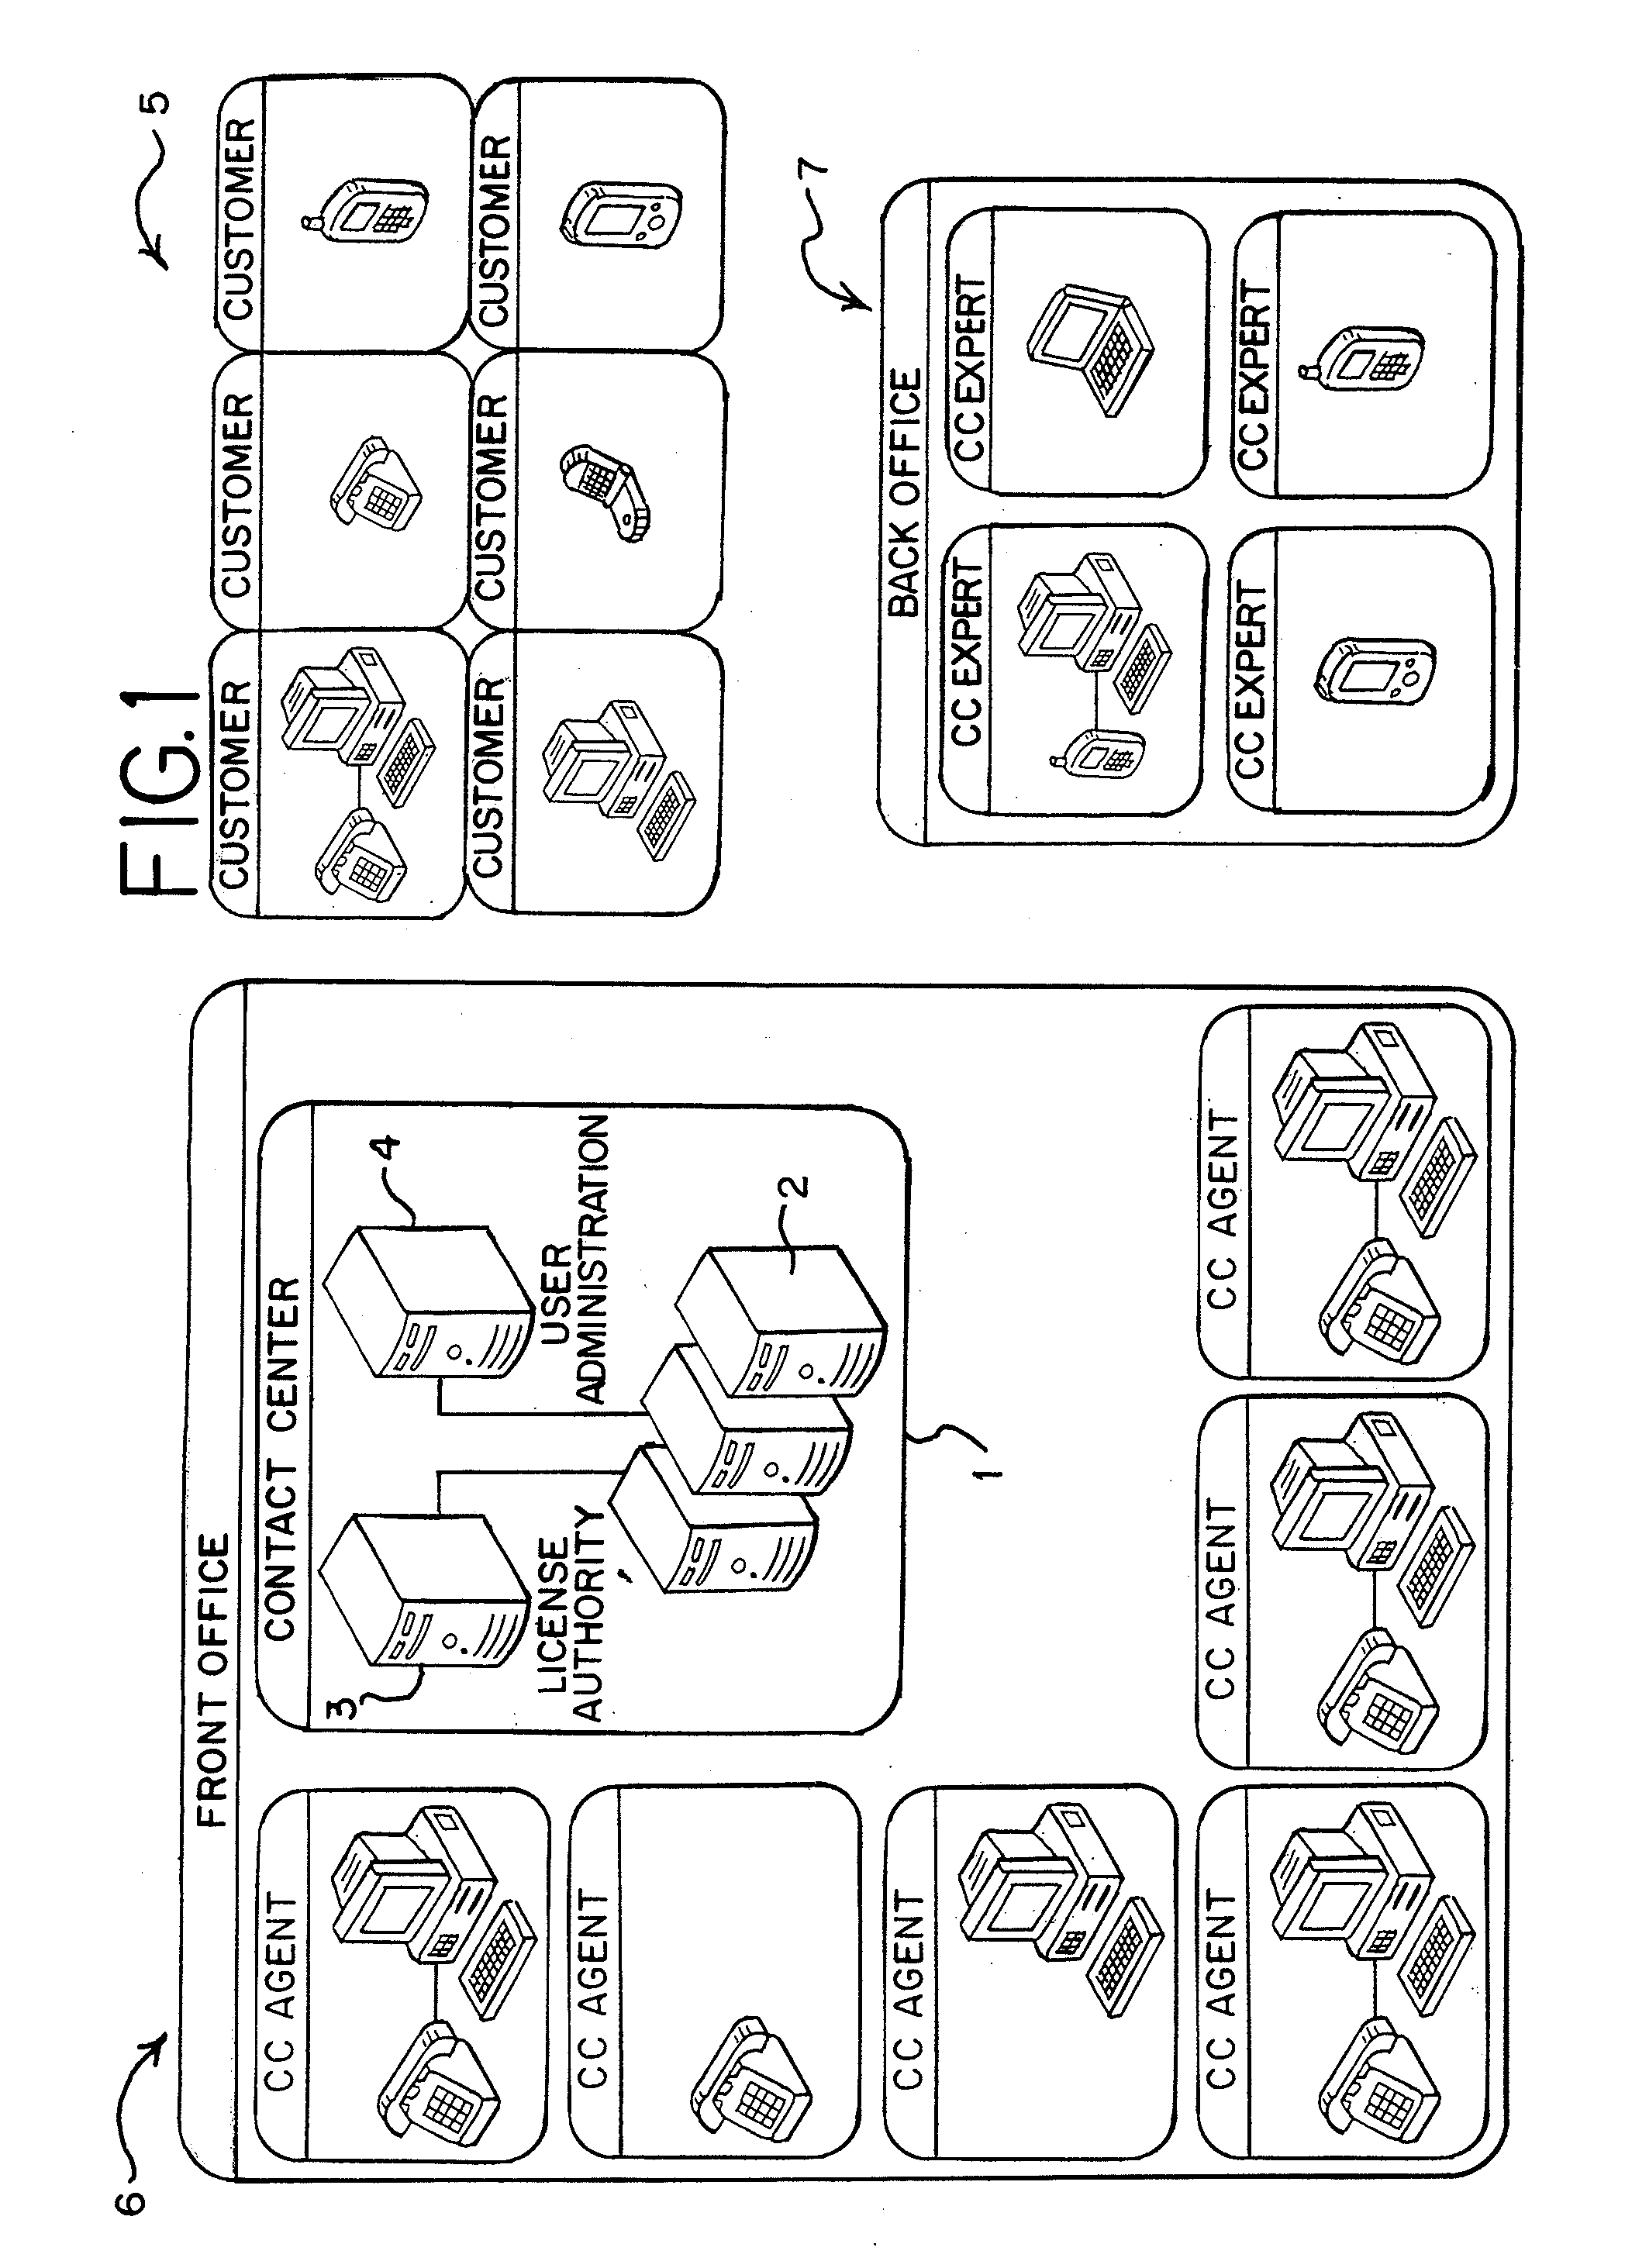 Method and system for controlling establishment of communication channels in a contact centre